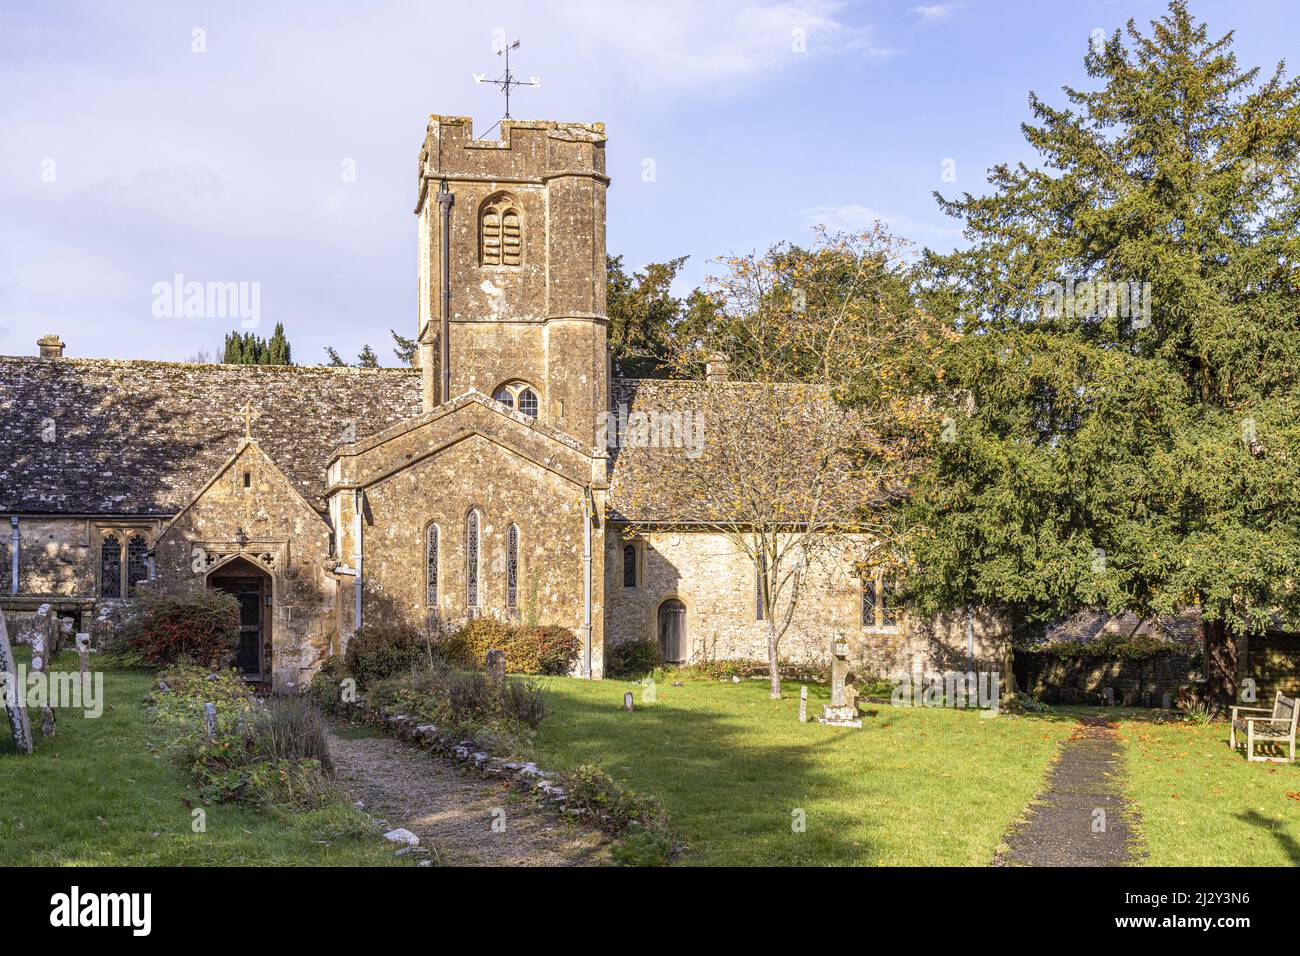 St Andrews church (dating back to the 12th century) in the Cotswold village of Sevenhampton, Gloucestershire, England UK Stock Photo